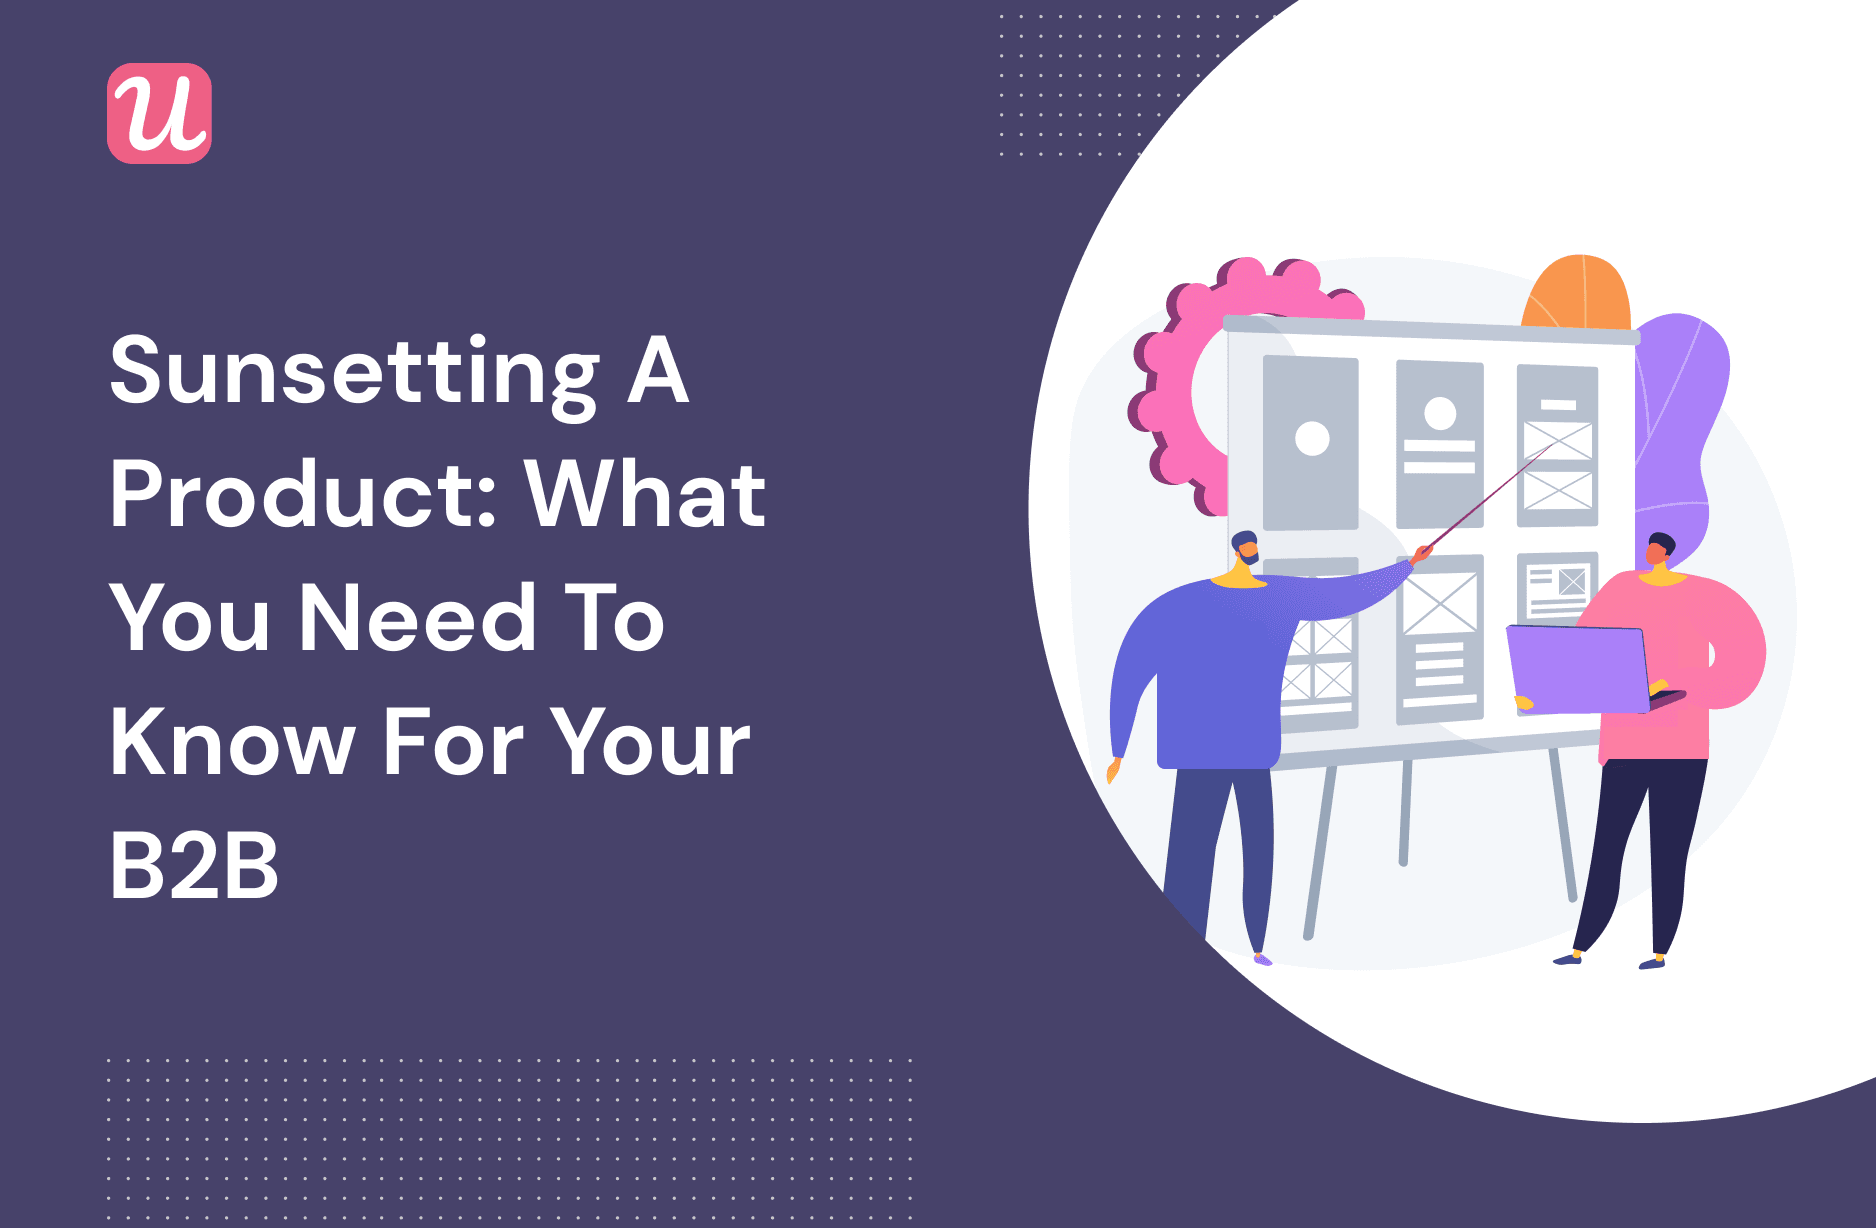 Sunsetting a Product: What You Need to Know For Your B2B